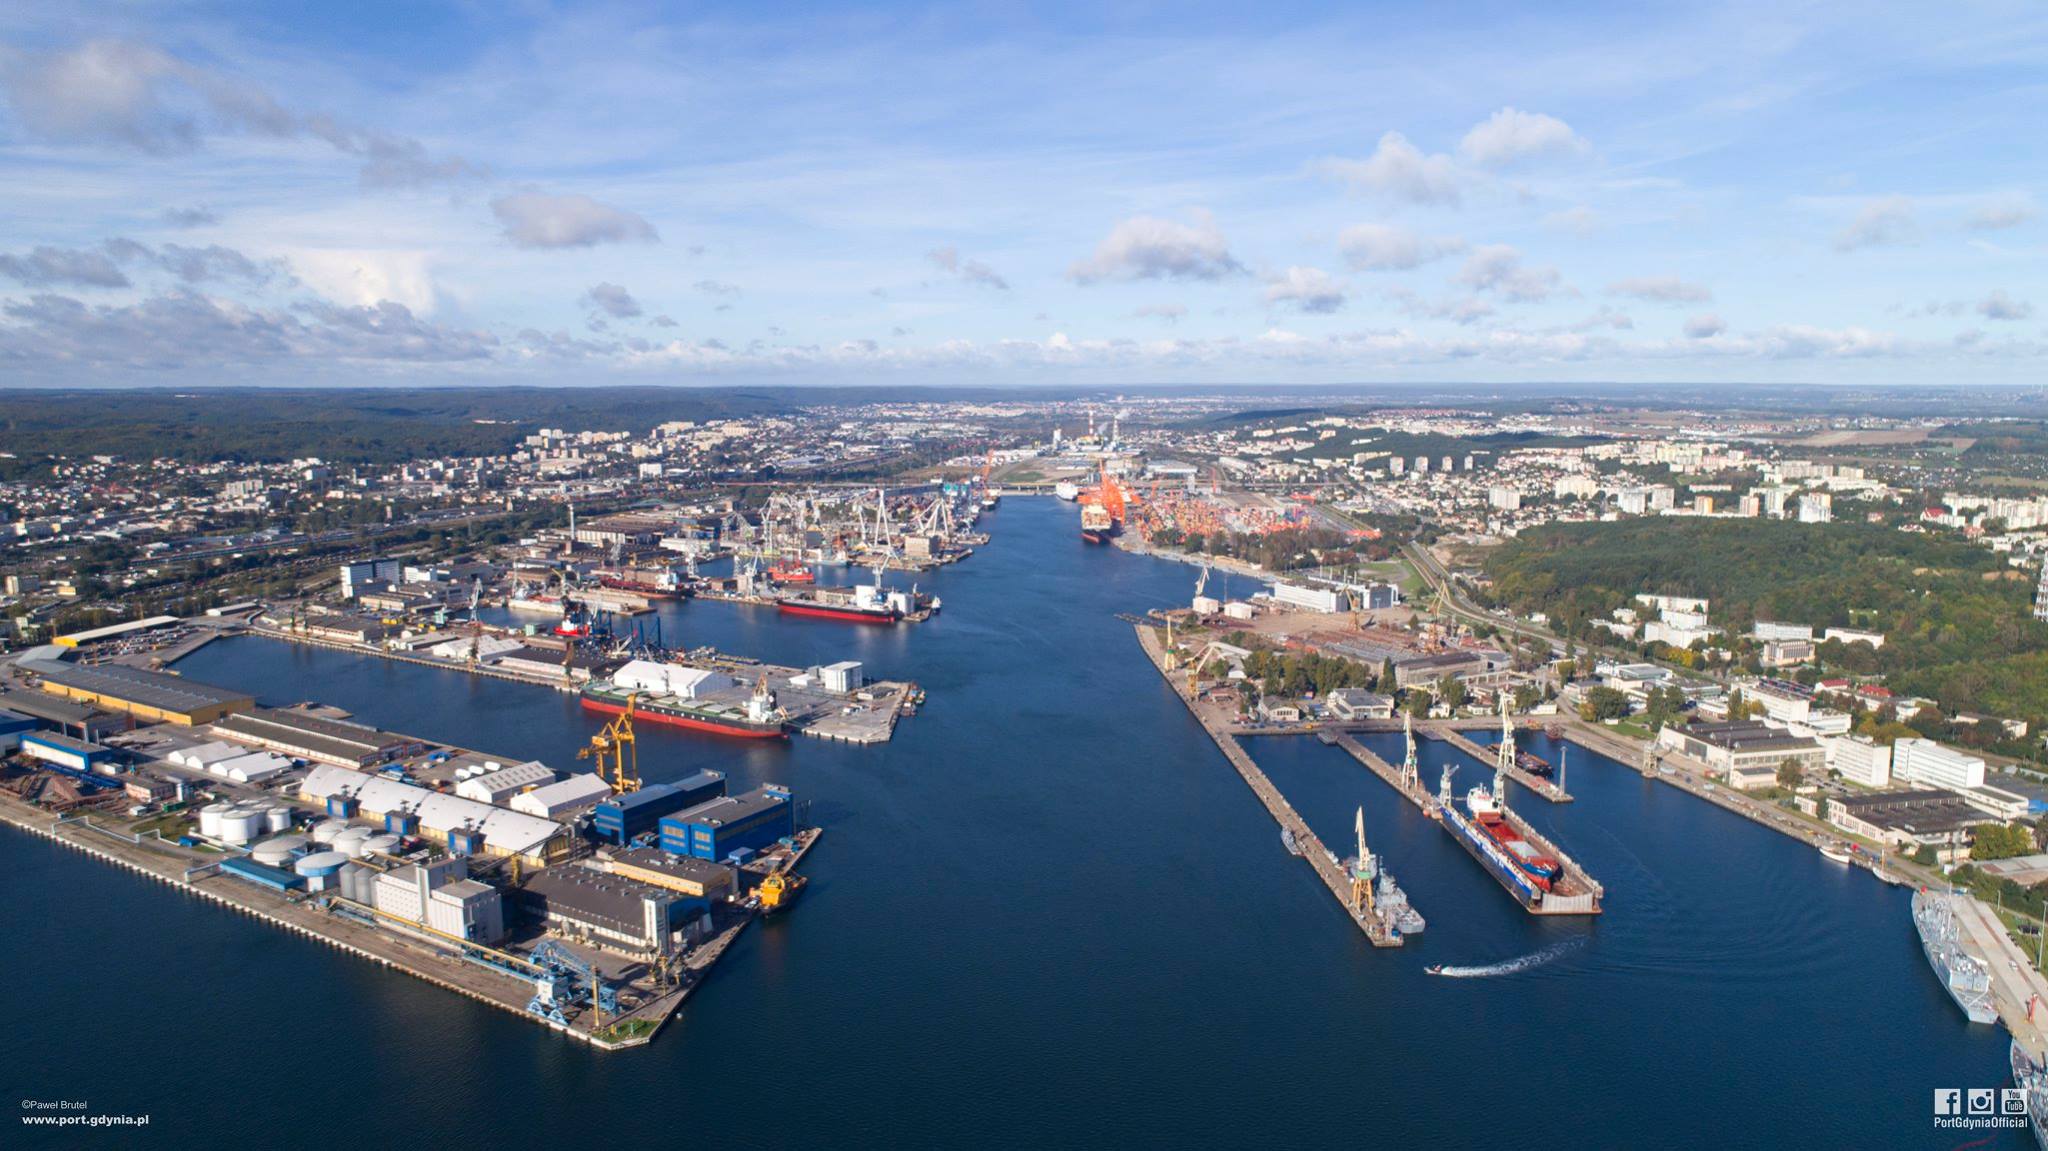 A new record to be set at the Port of Gdynia - MarinePoland.com